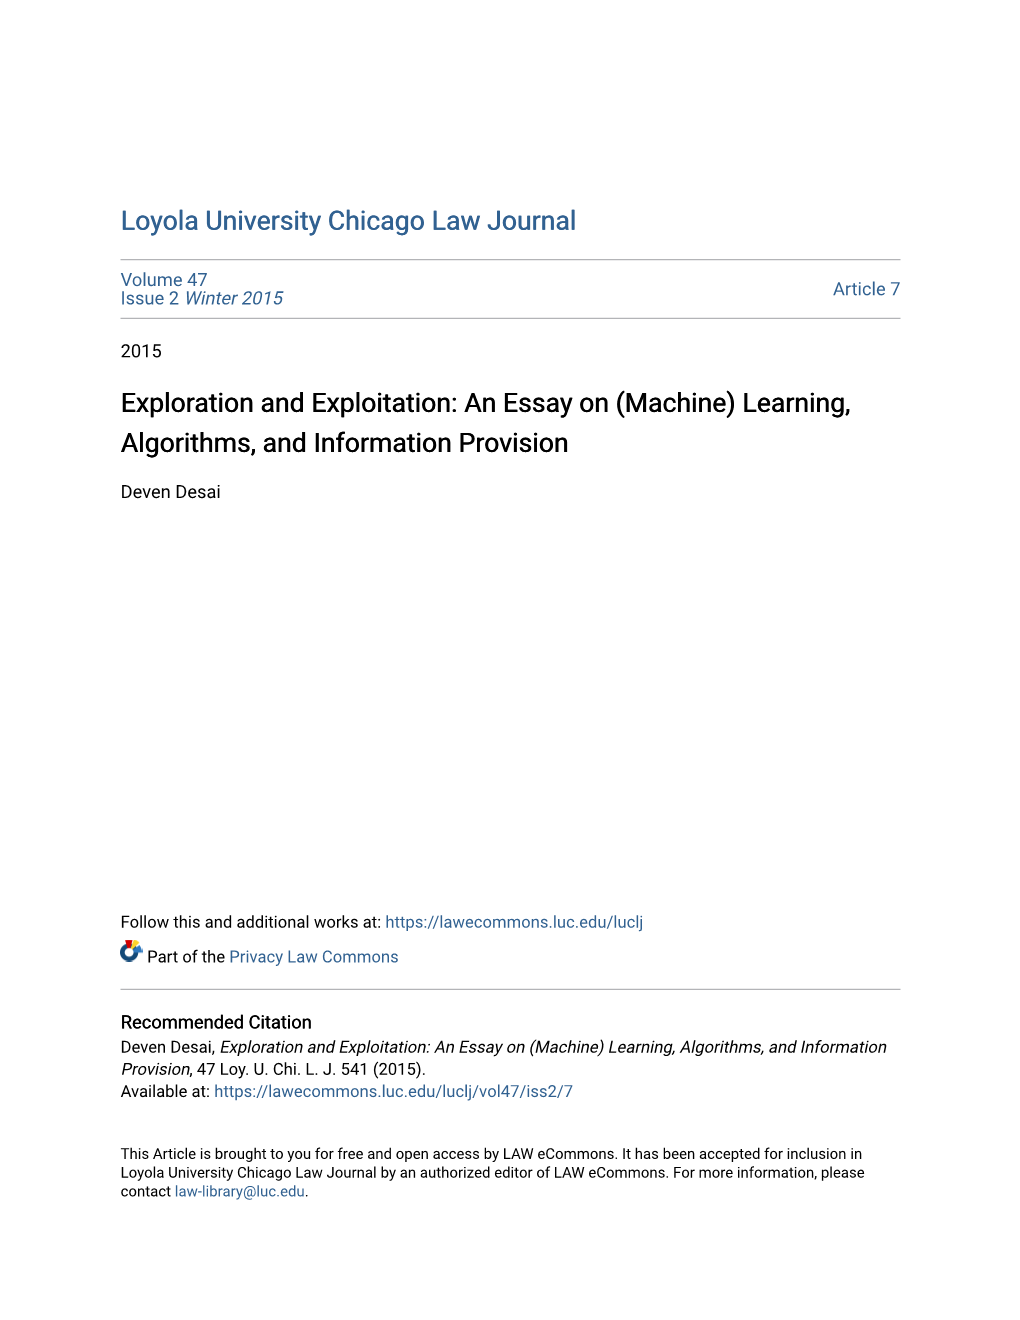 An Essay on (Machine) Learning, Algorithms, and Information Provision